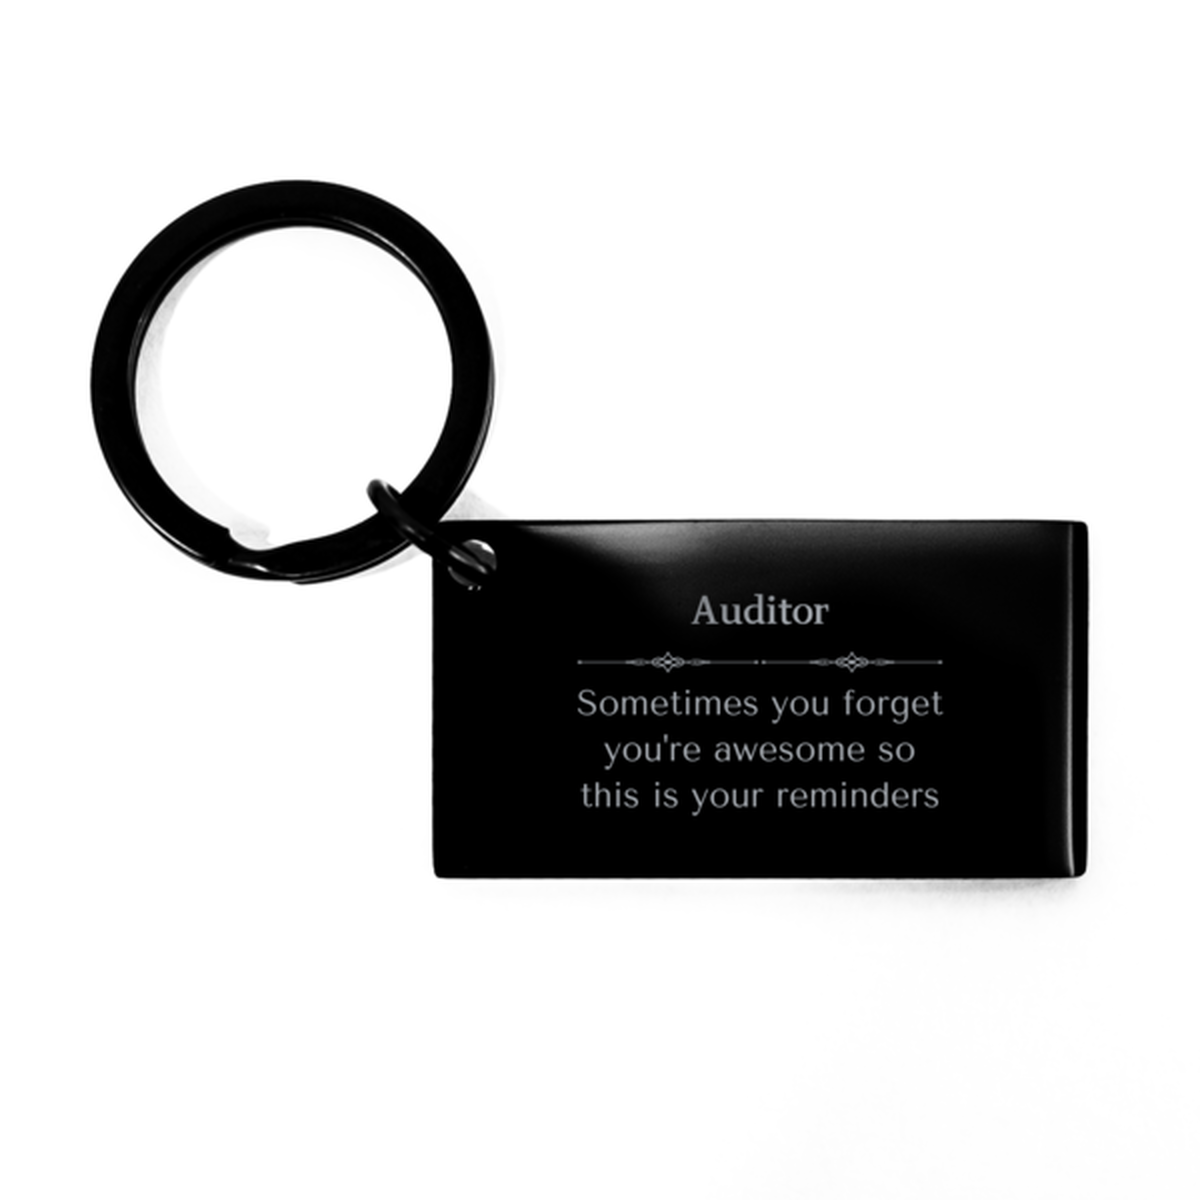 Sentimental Auditor Keychain, Counselor Sometimes you forget you're awesome so this is your reminders, Graduation Christmas Birthday Gifts for Auditor, Men, Women, Coworkers